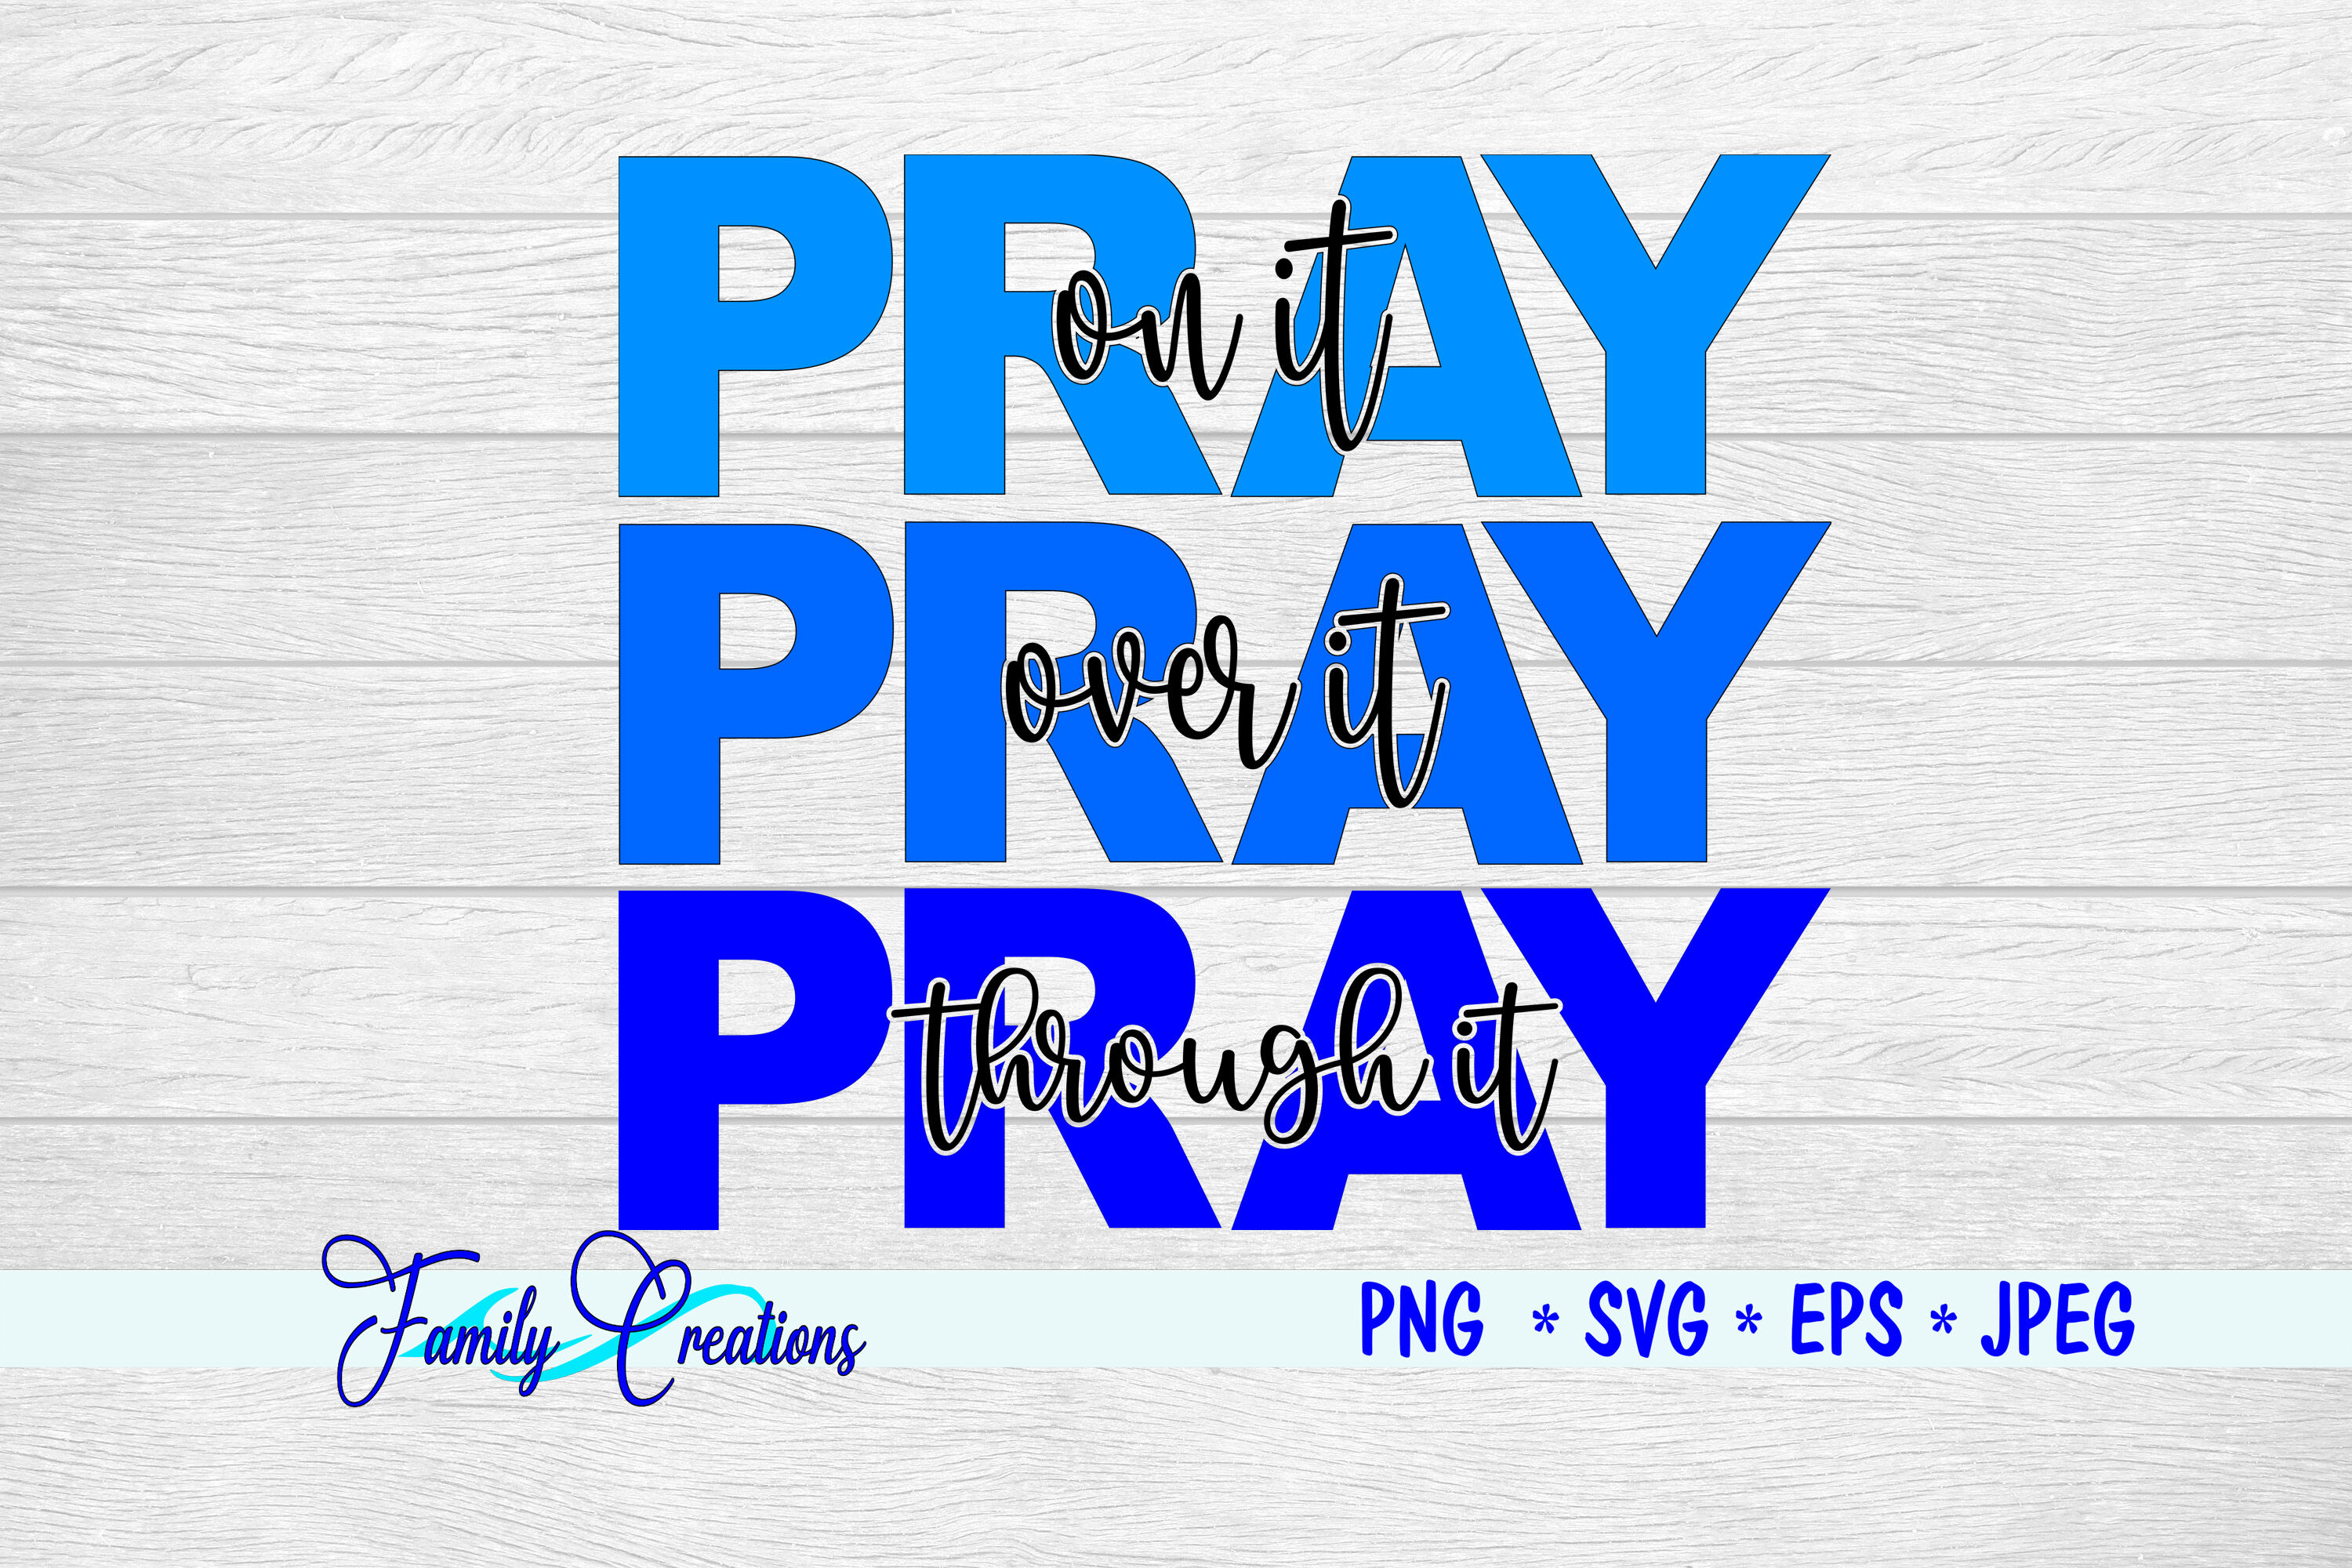 Pray On It Over It and Through It By Family Creations | TheHungryJPEG